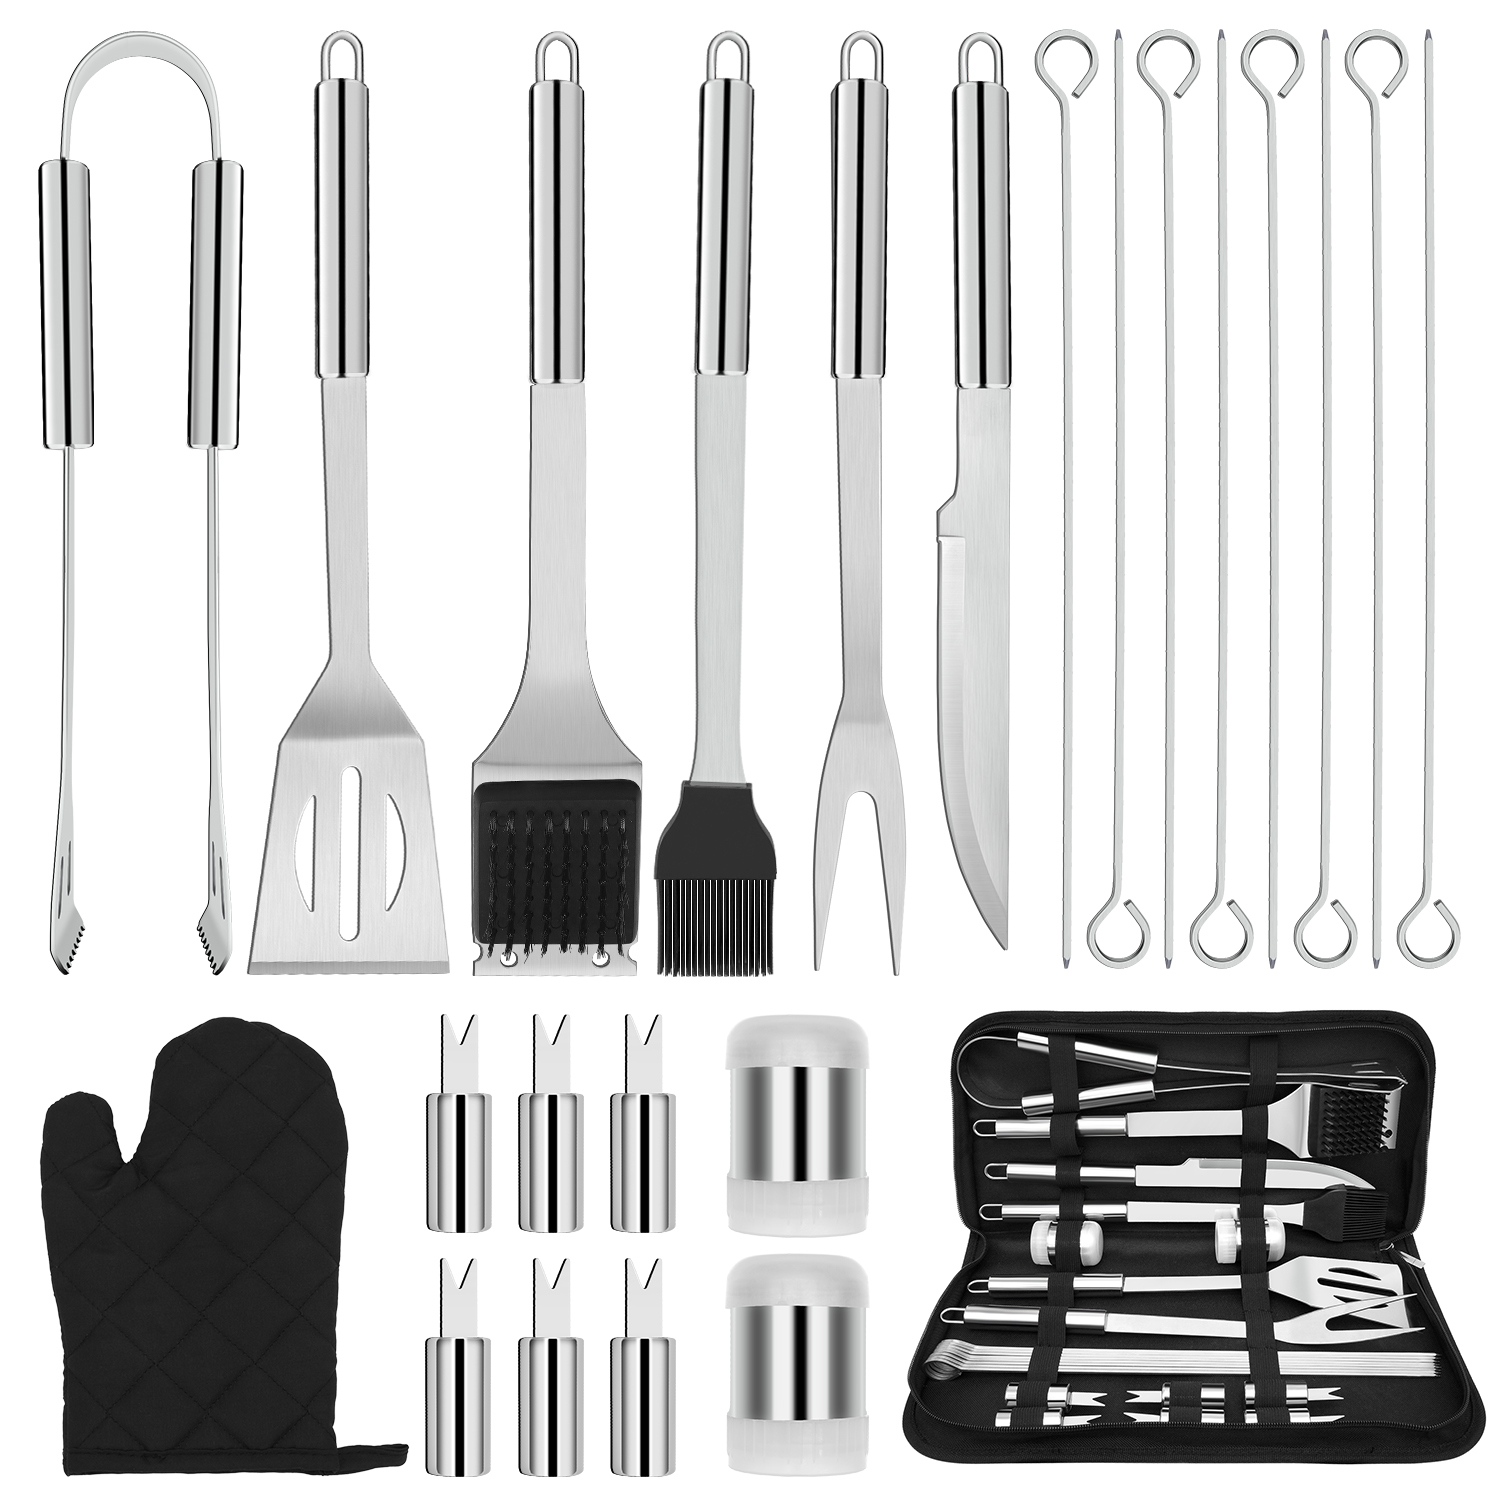 JOW BBQ Grill Accessories Set with Case, 26pc Stainless Steel Heavy Duty Barbecue Grilling Tool Utensils Kit with Tong, Grill Cleaning Brush, Spatula, Fork, Basting Brush - image 1 of 12